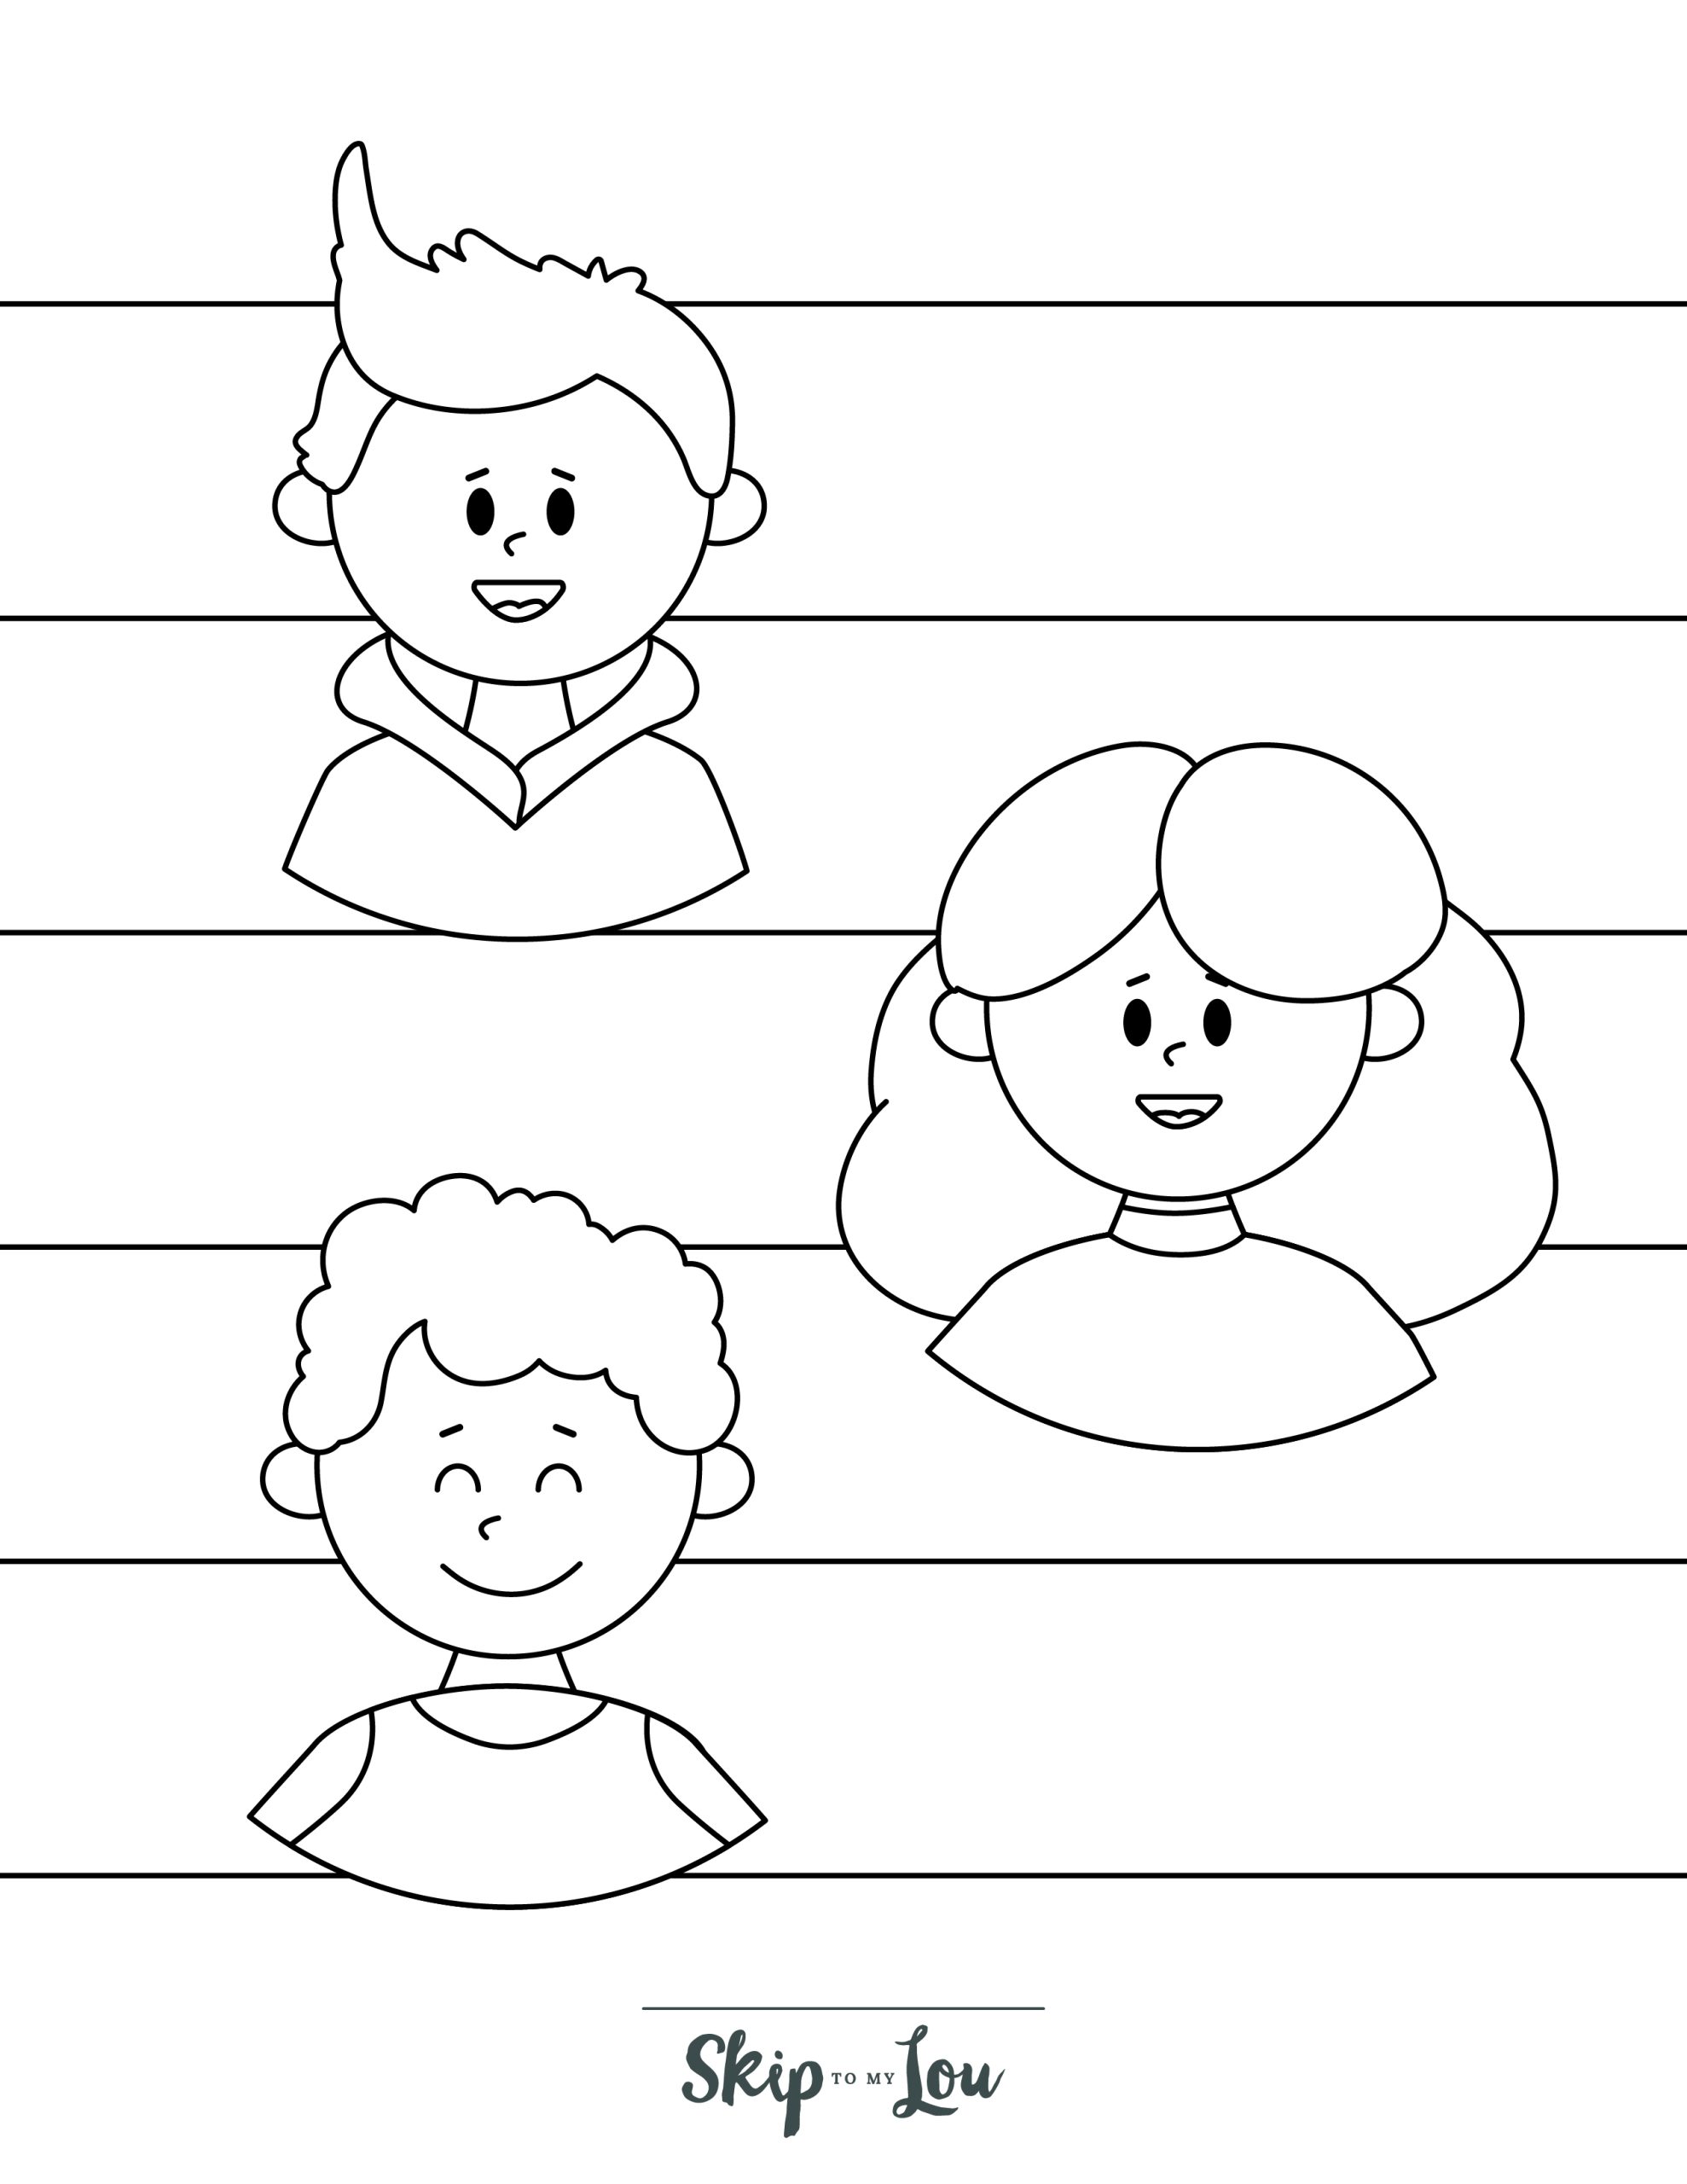 People Coloring Page 9 - Line drawing of two little boys & a girl